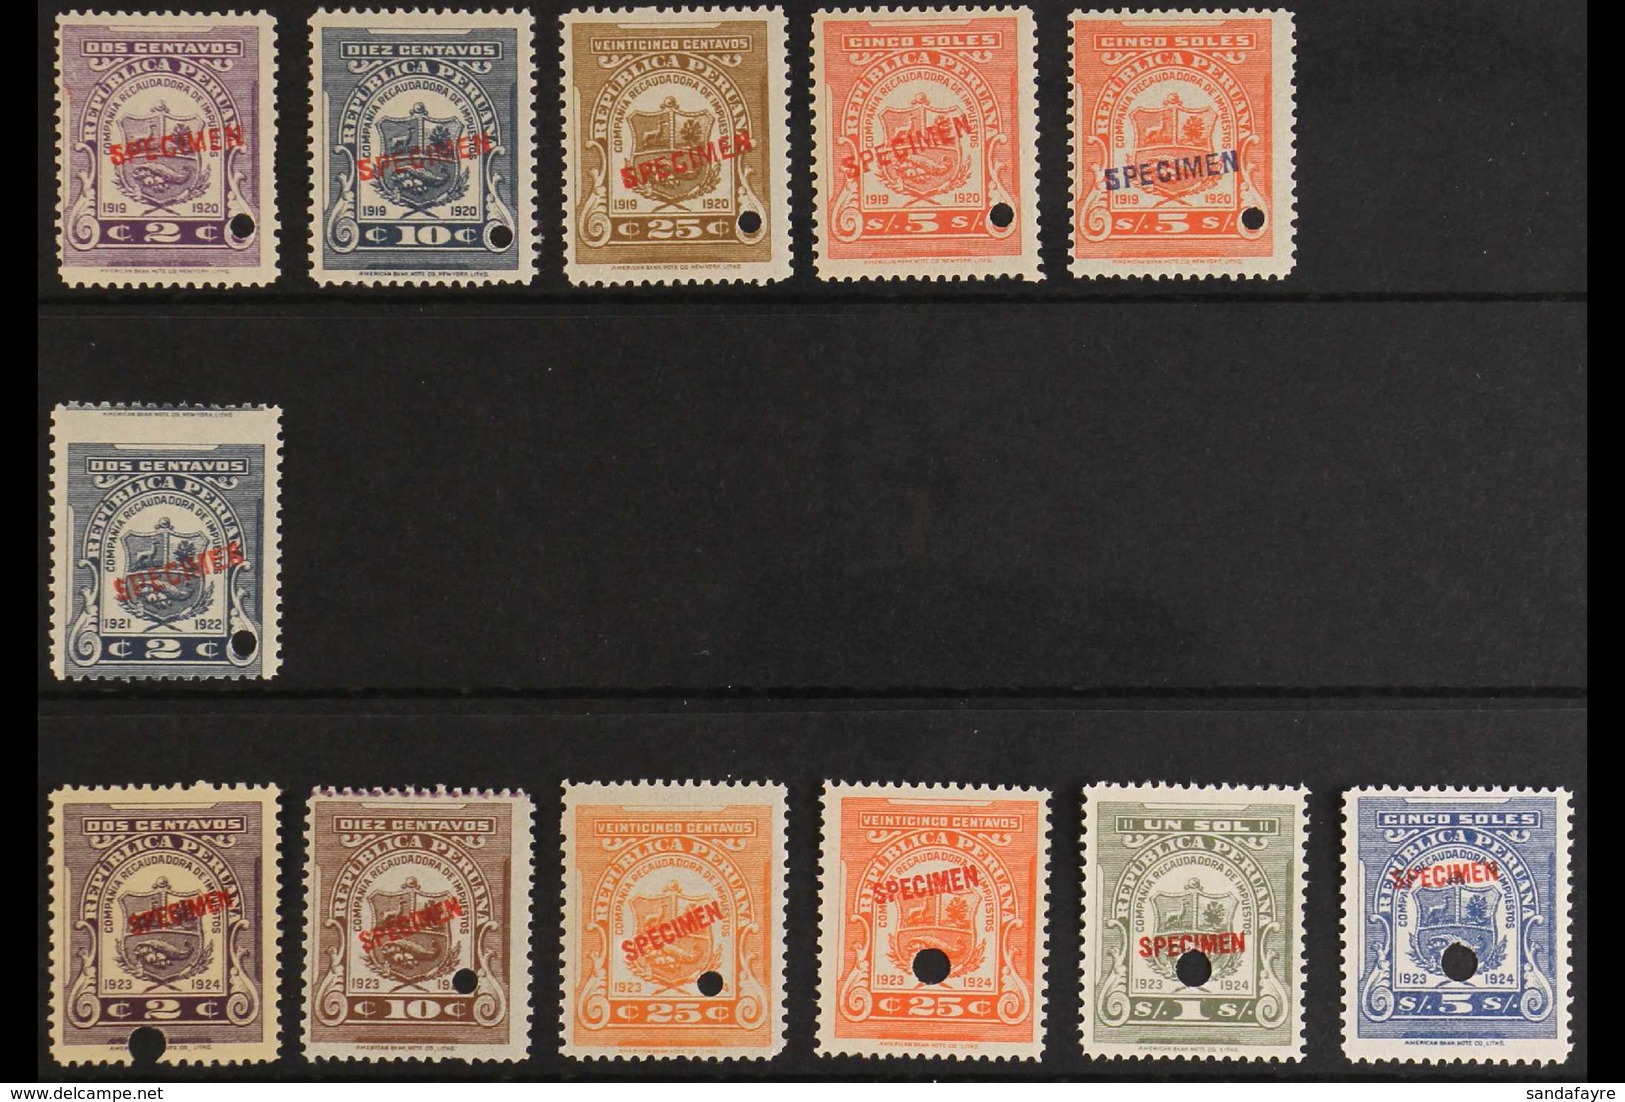 REVENUES DOCUMENT STAMPS 1912-1924 Never Hinged Mint All Different Group On Stock Cards, All With "SPECIMEN" Overprints  - Pérou